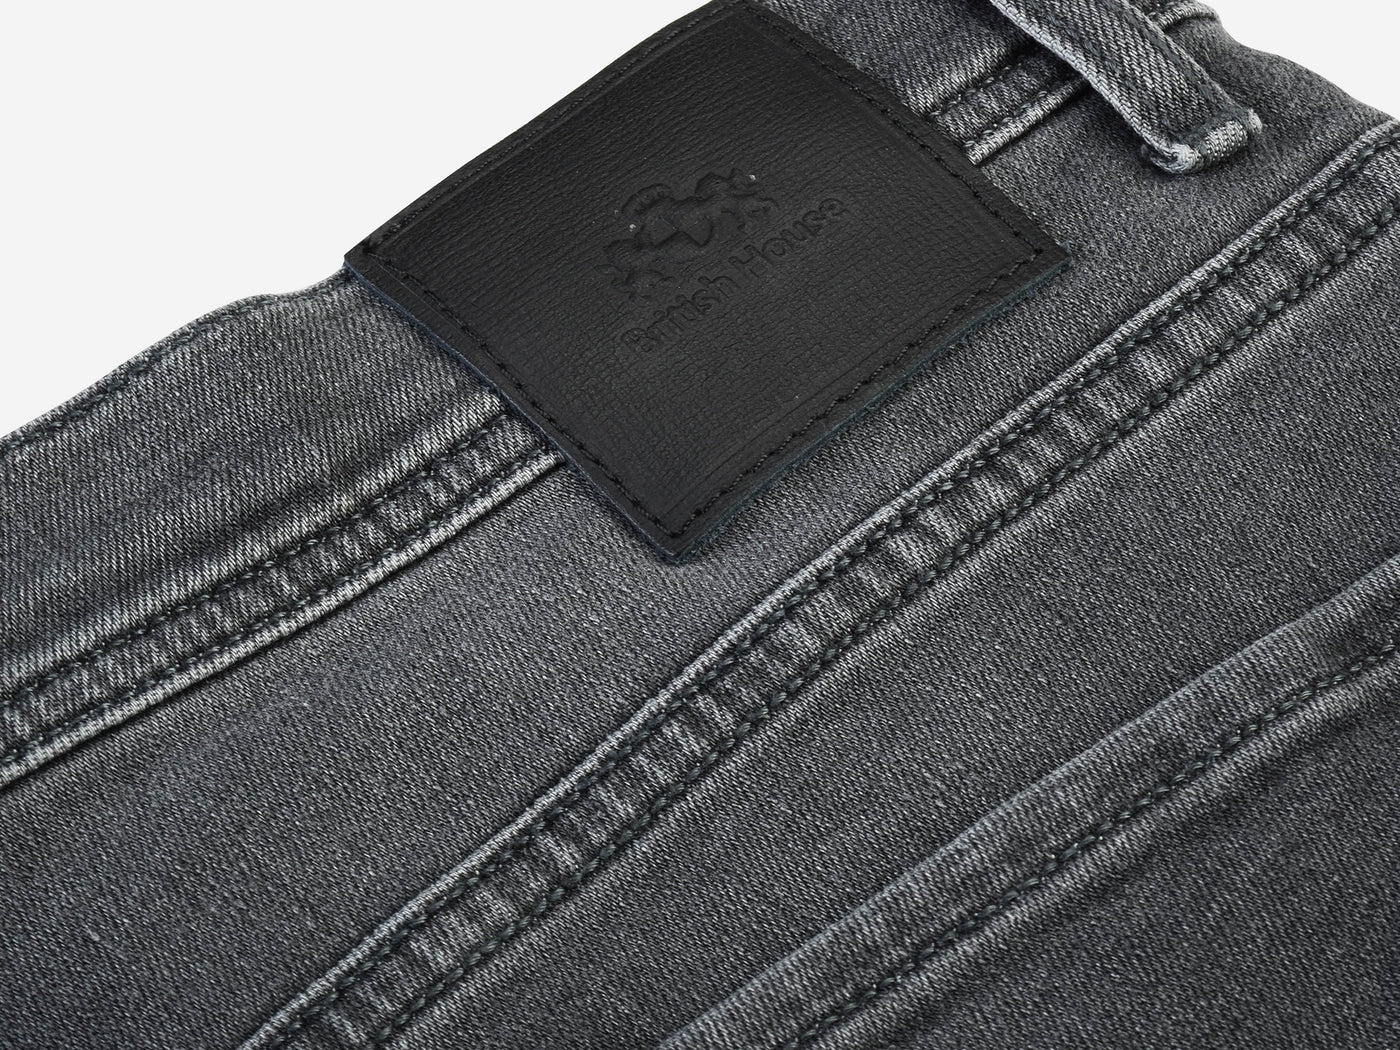 Contemporary-fit Jeans in Gray Denim